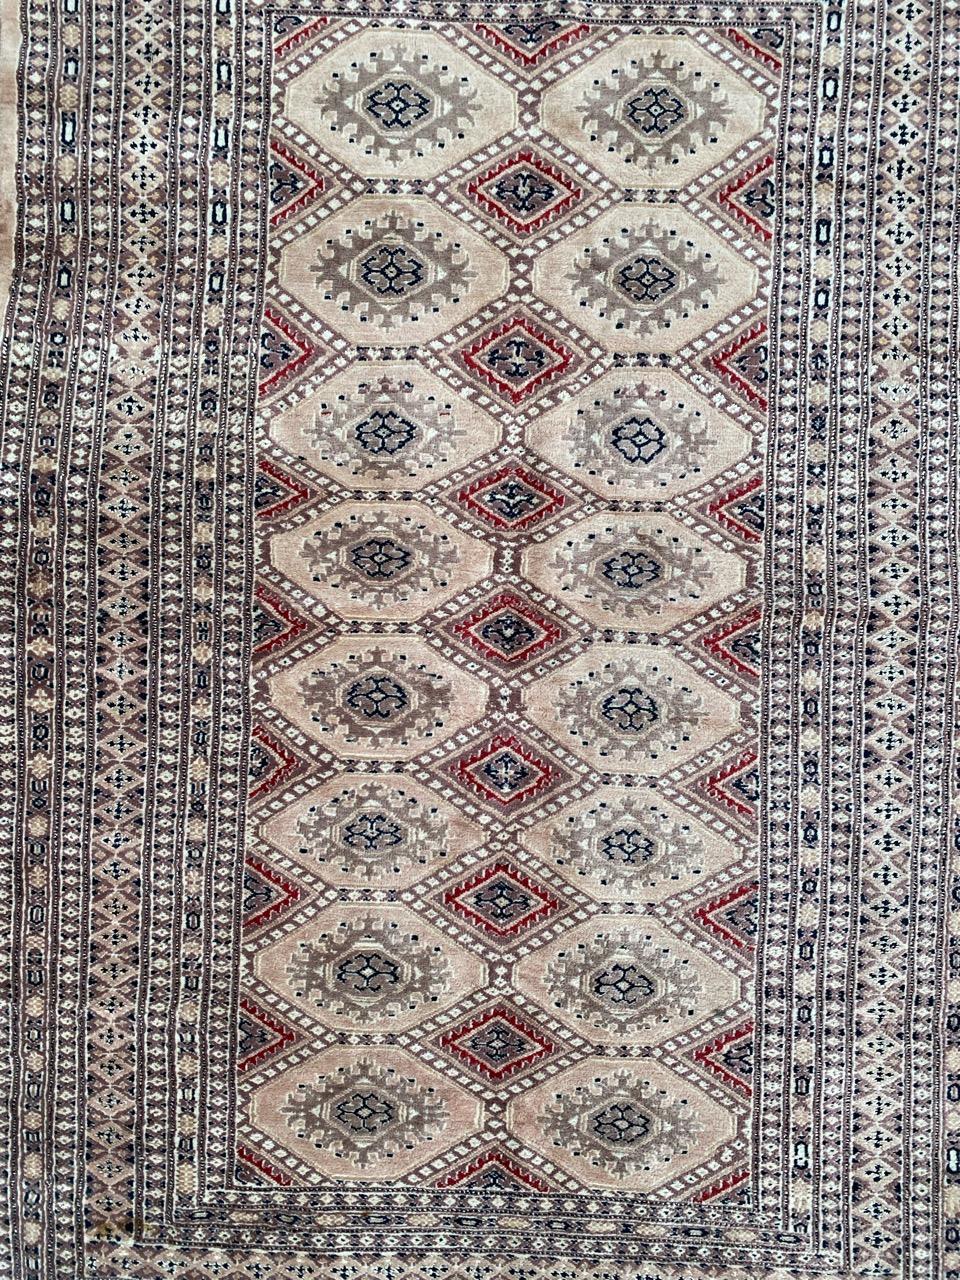 Nice mid-century rug with beautiful geometrical design and nice colors, entirely hand knotted with wool velvet on cotton foundation.

✨✨✨
